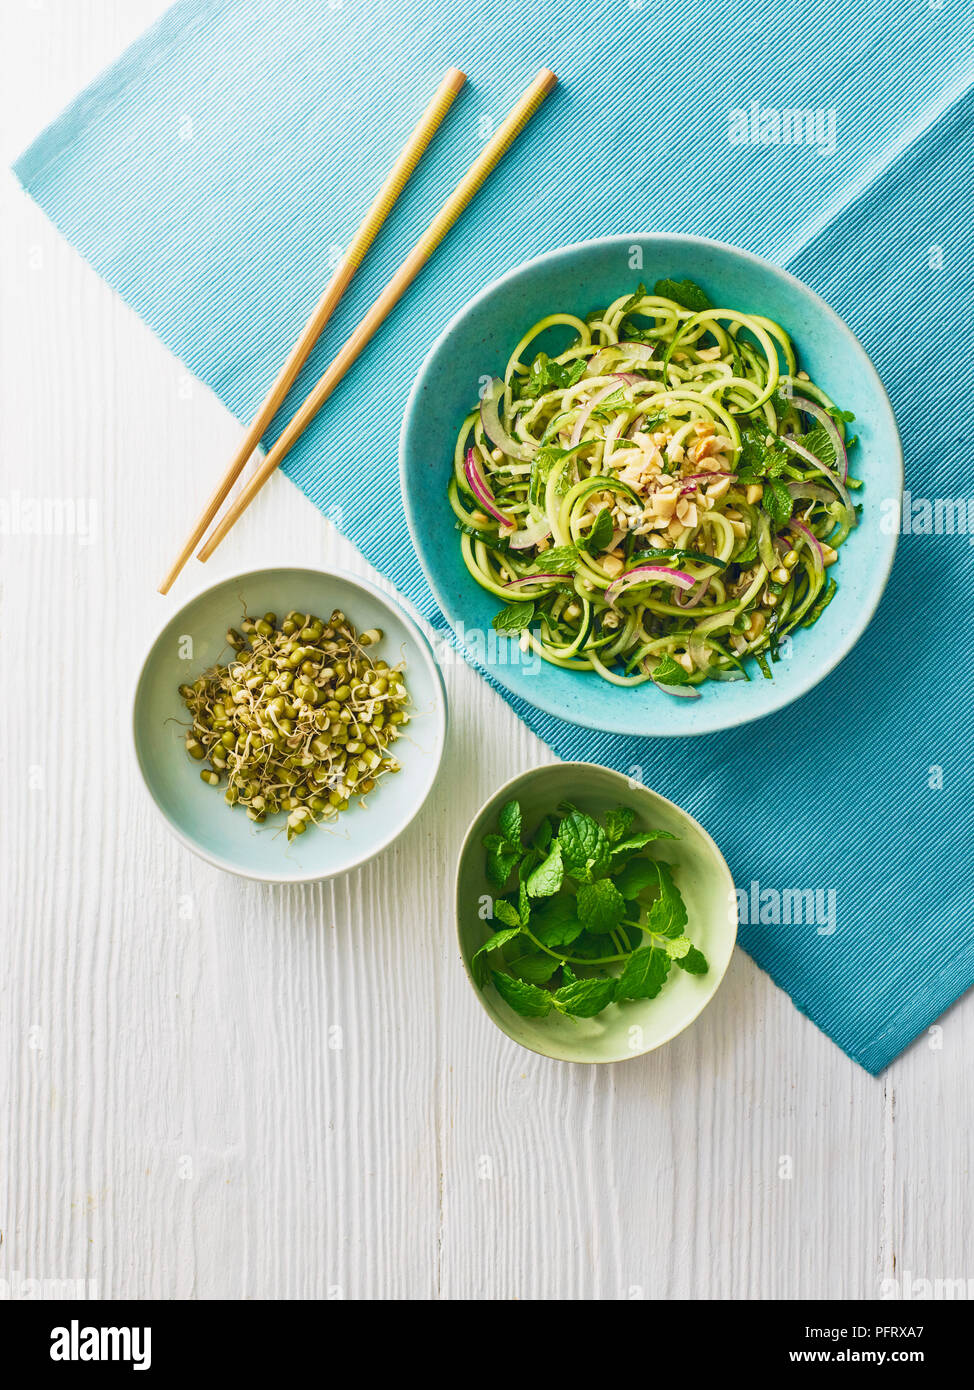 Sprouted Asian-style salad Stock Photo